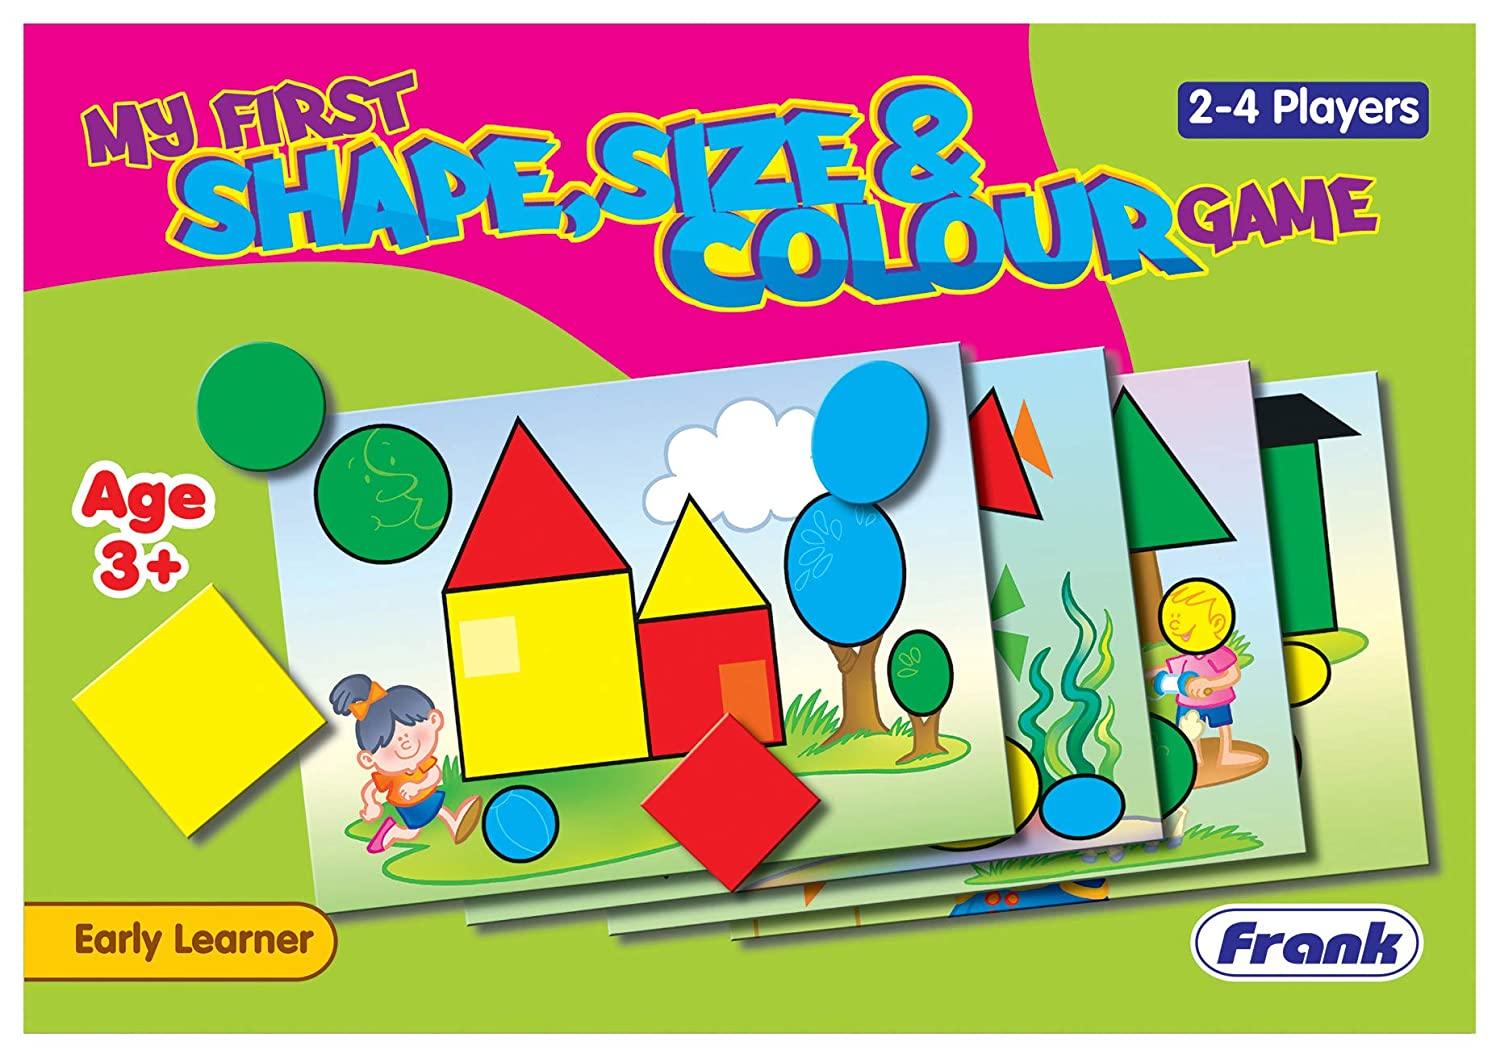 Frank My First Shape, Size & Colour Game ‚Äö√Ñ√¨ 4 Playing Boards, 32 Shapes, 1 Bag for Ages 3 & Above